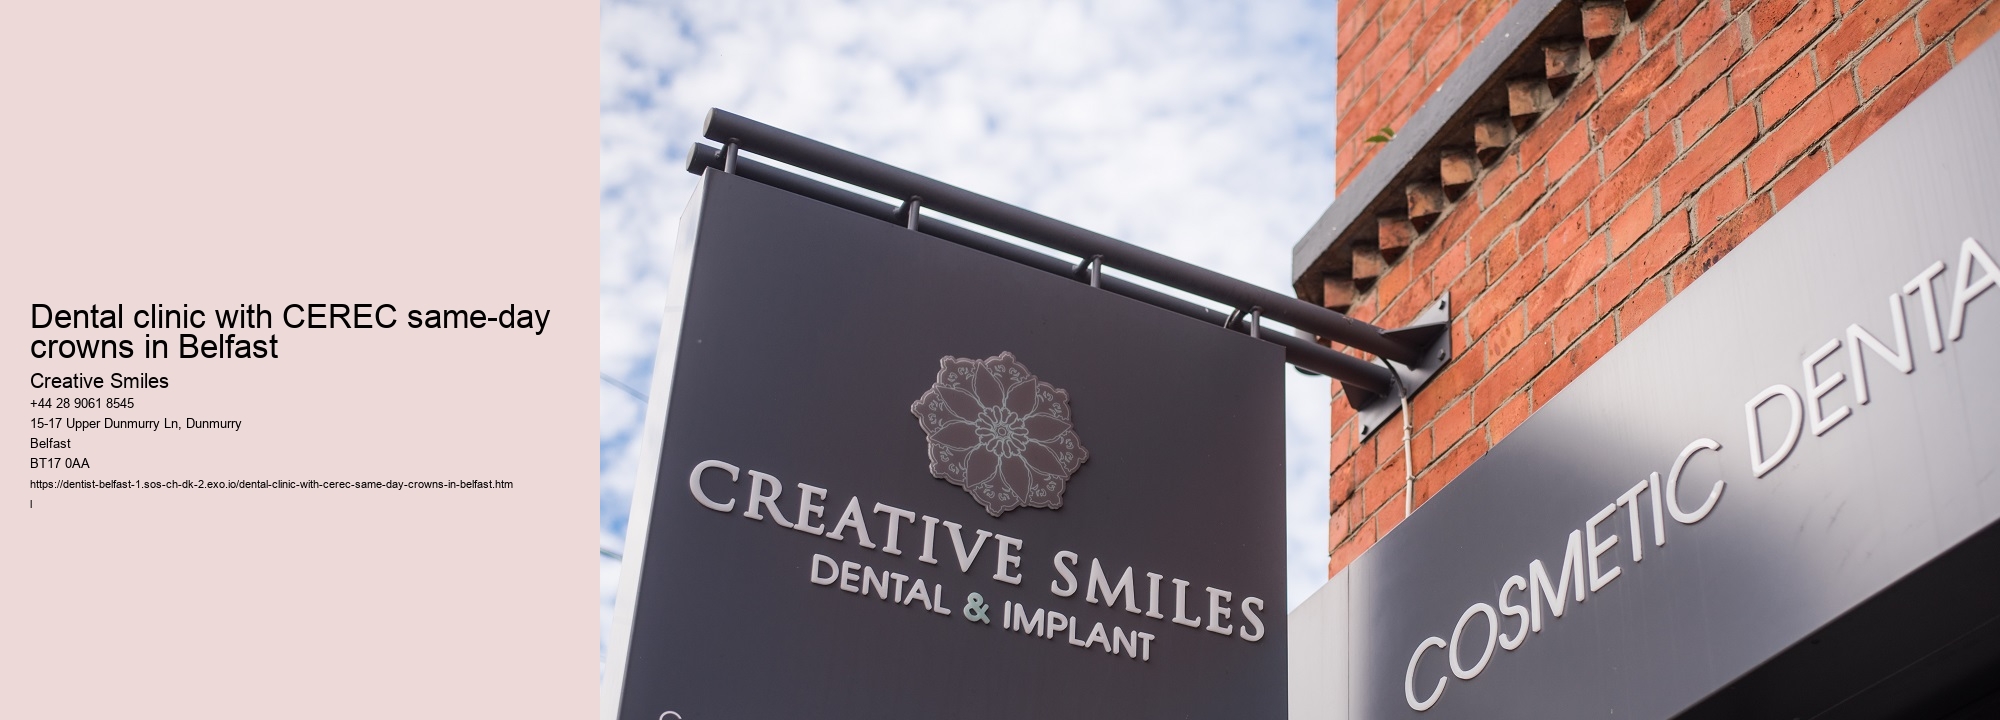 Dental clinic with CEREC same-day crowns in Belfast